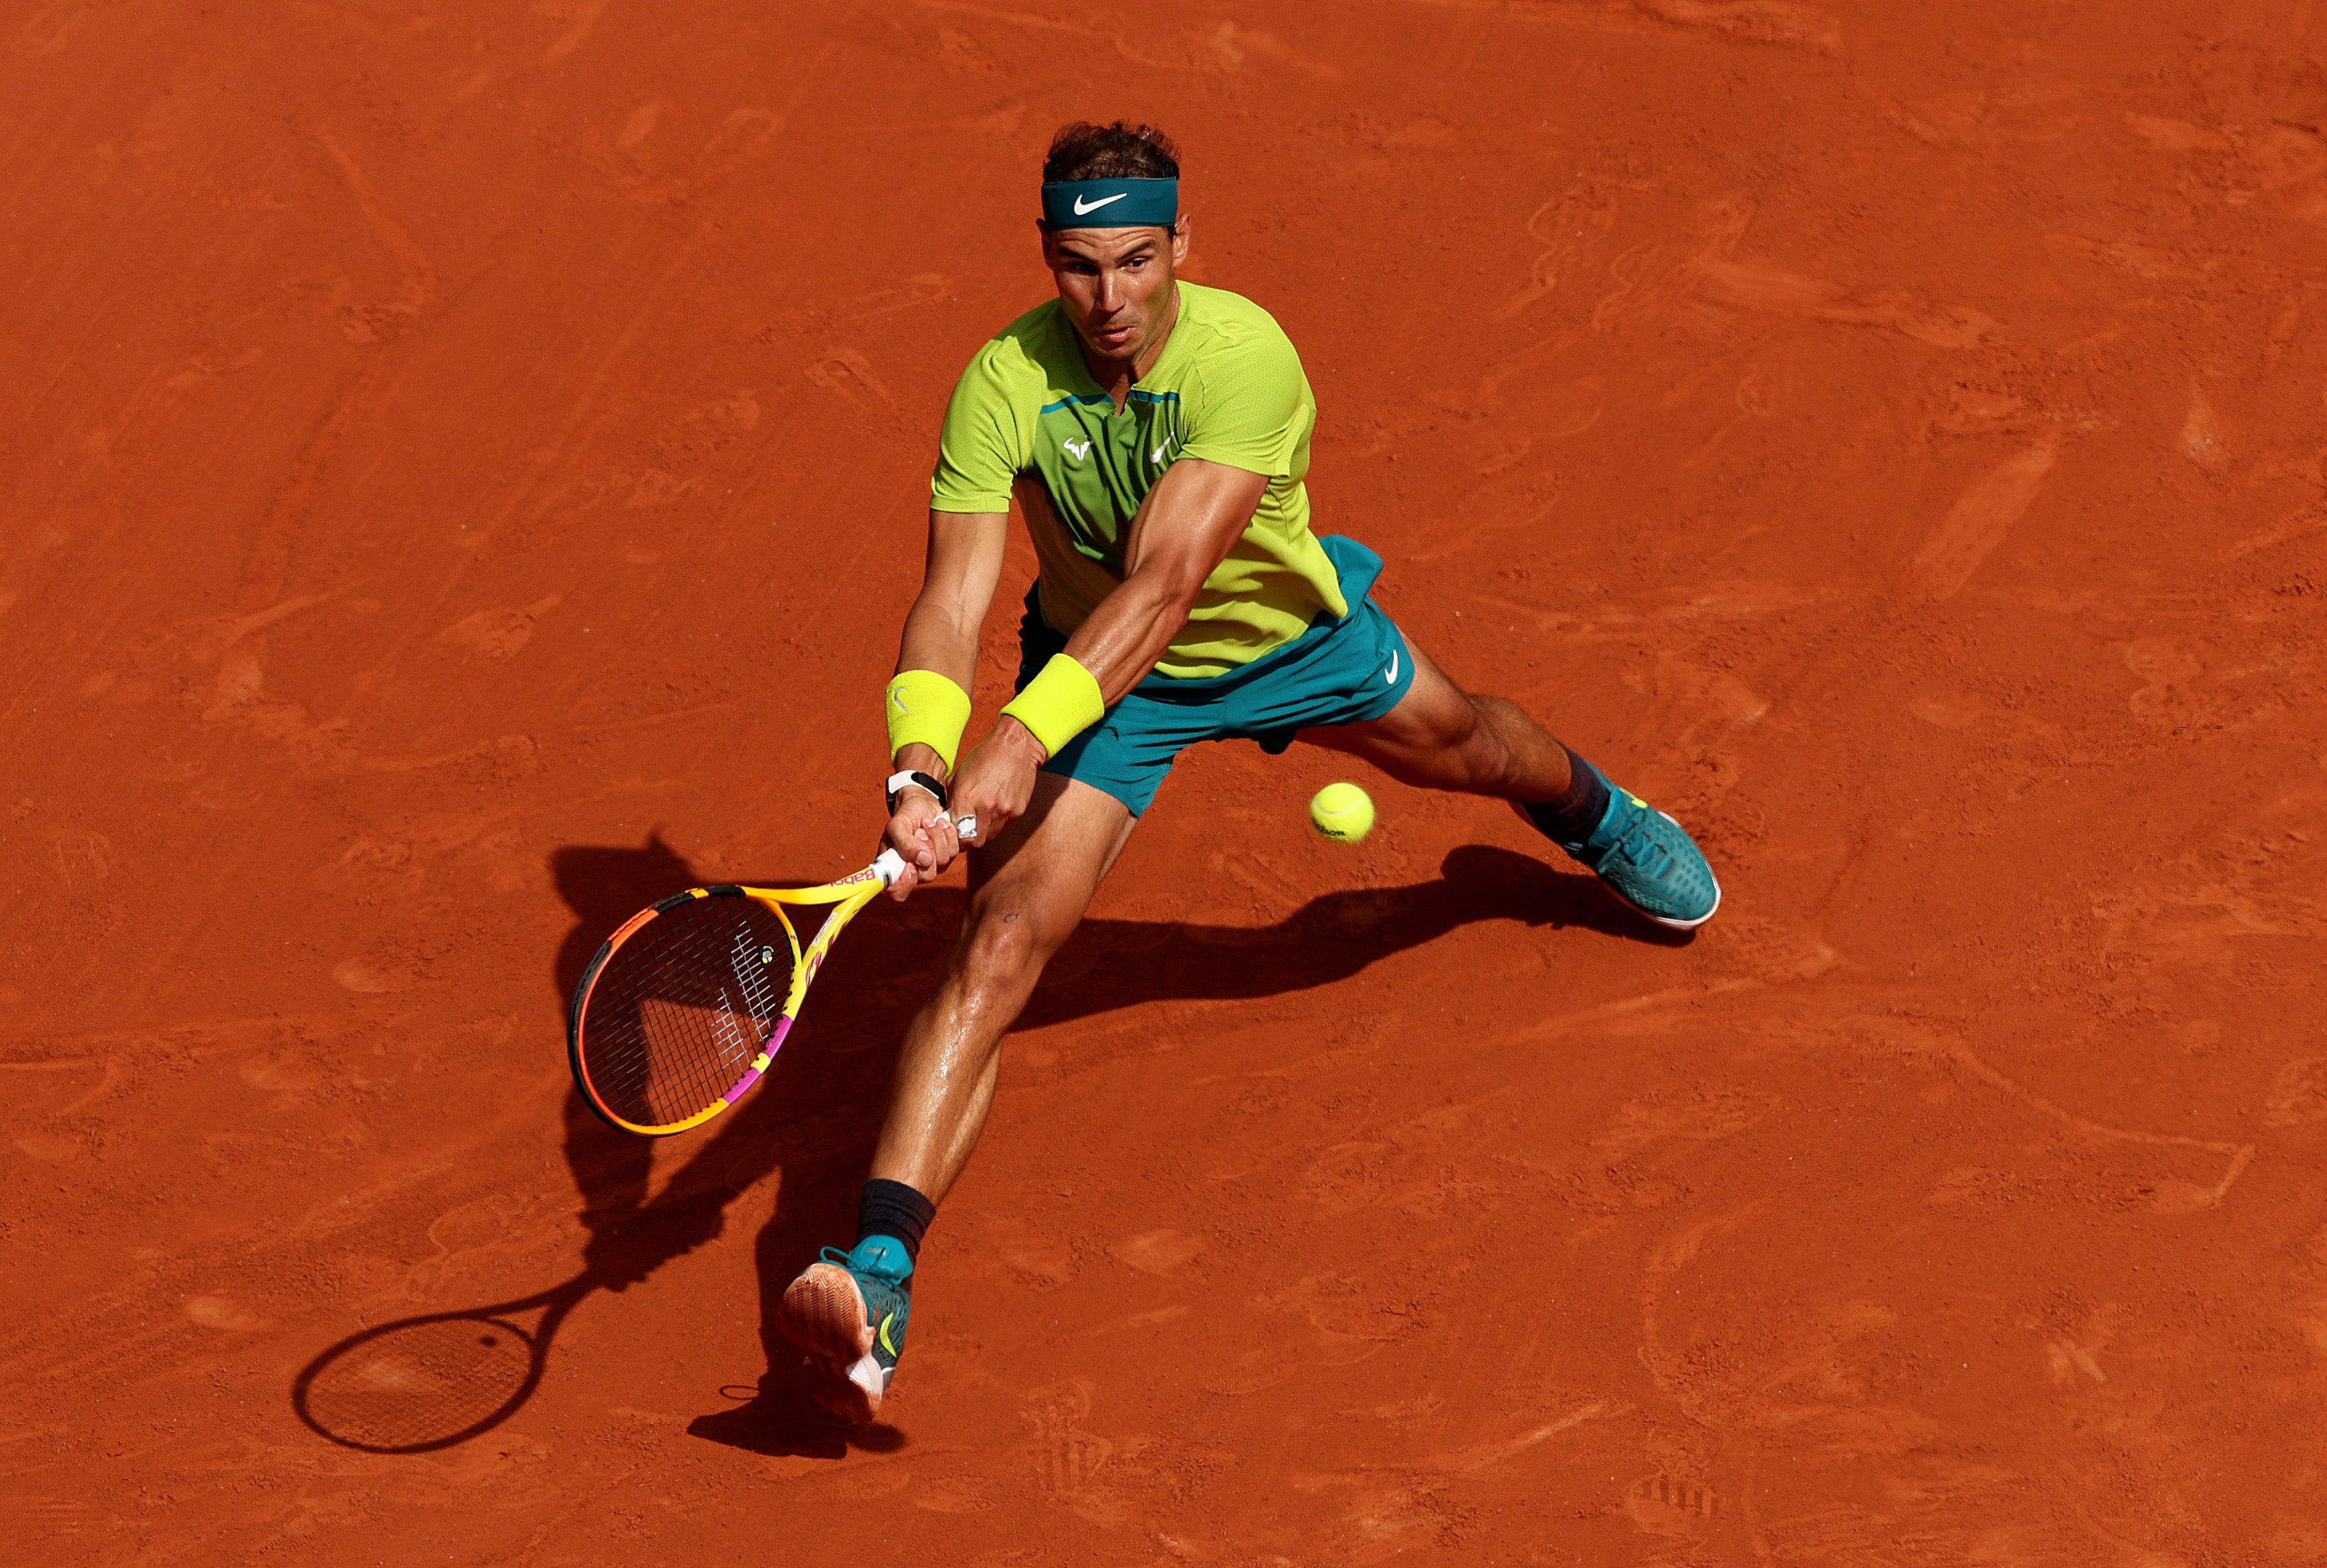 Rafael Nadal could make a return to action in Barcelona this week